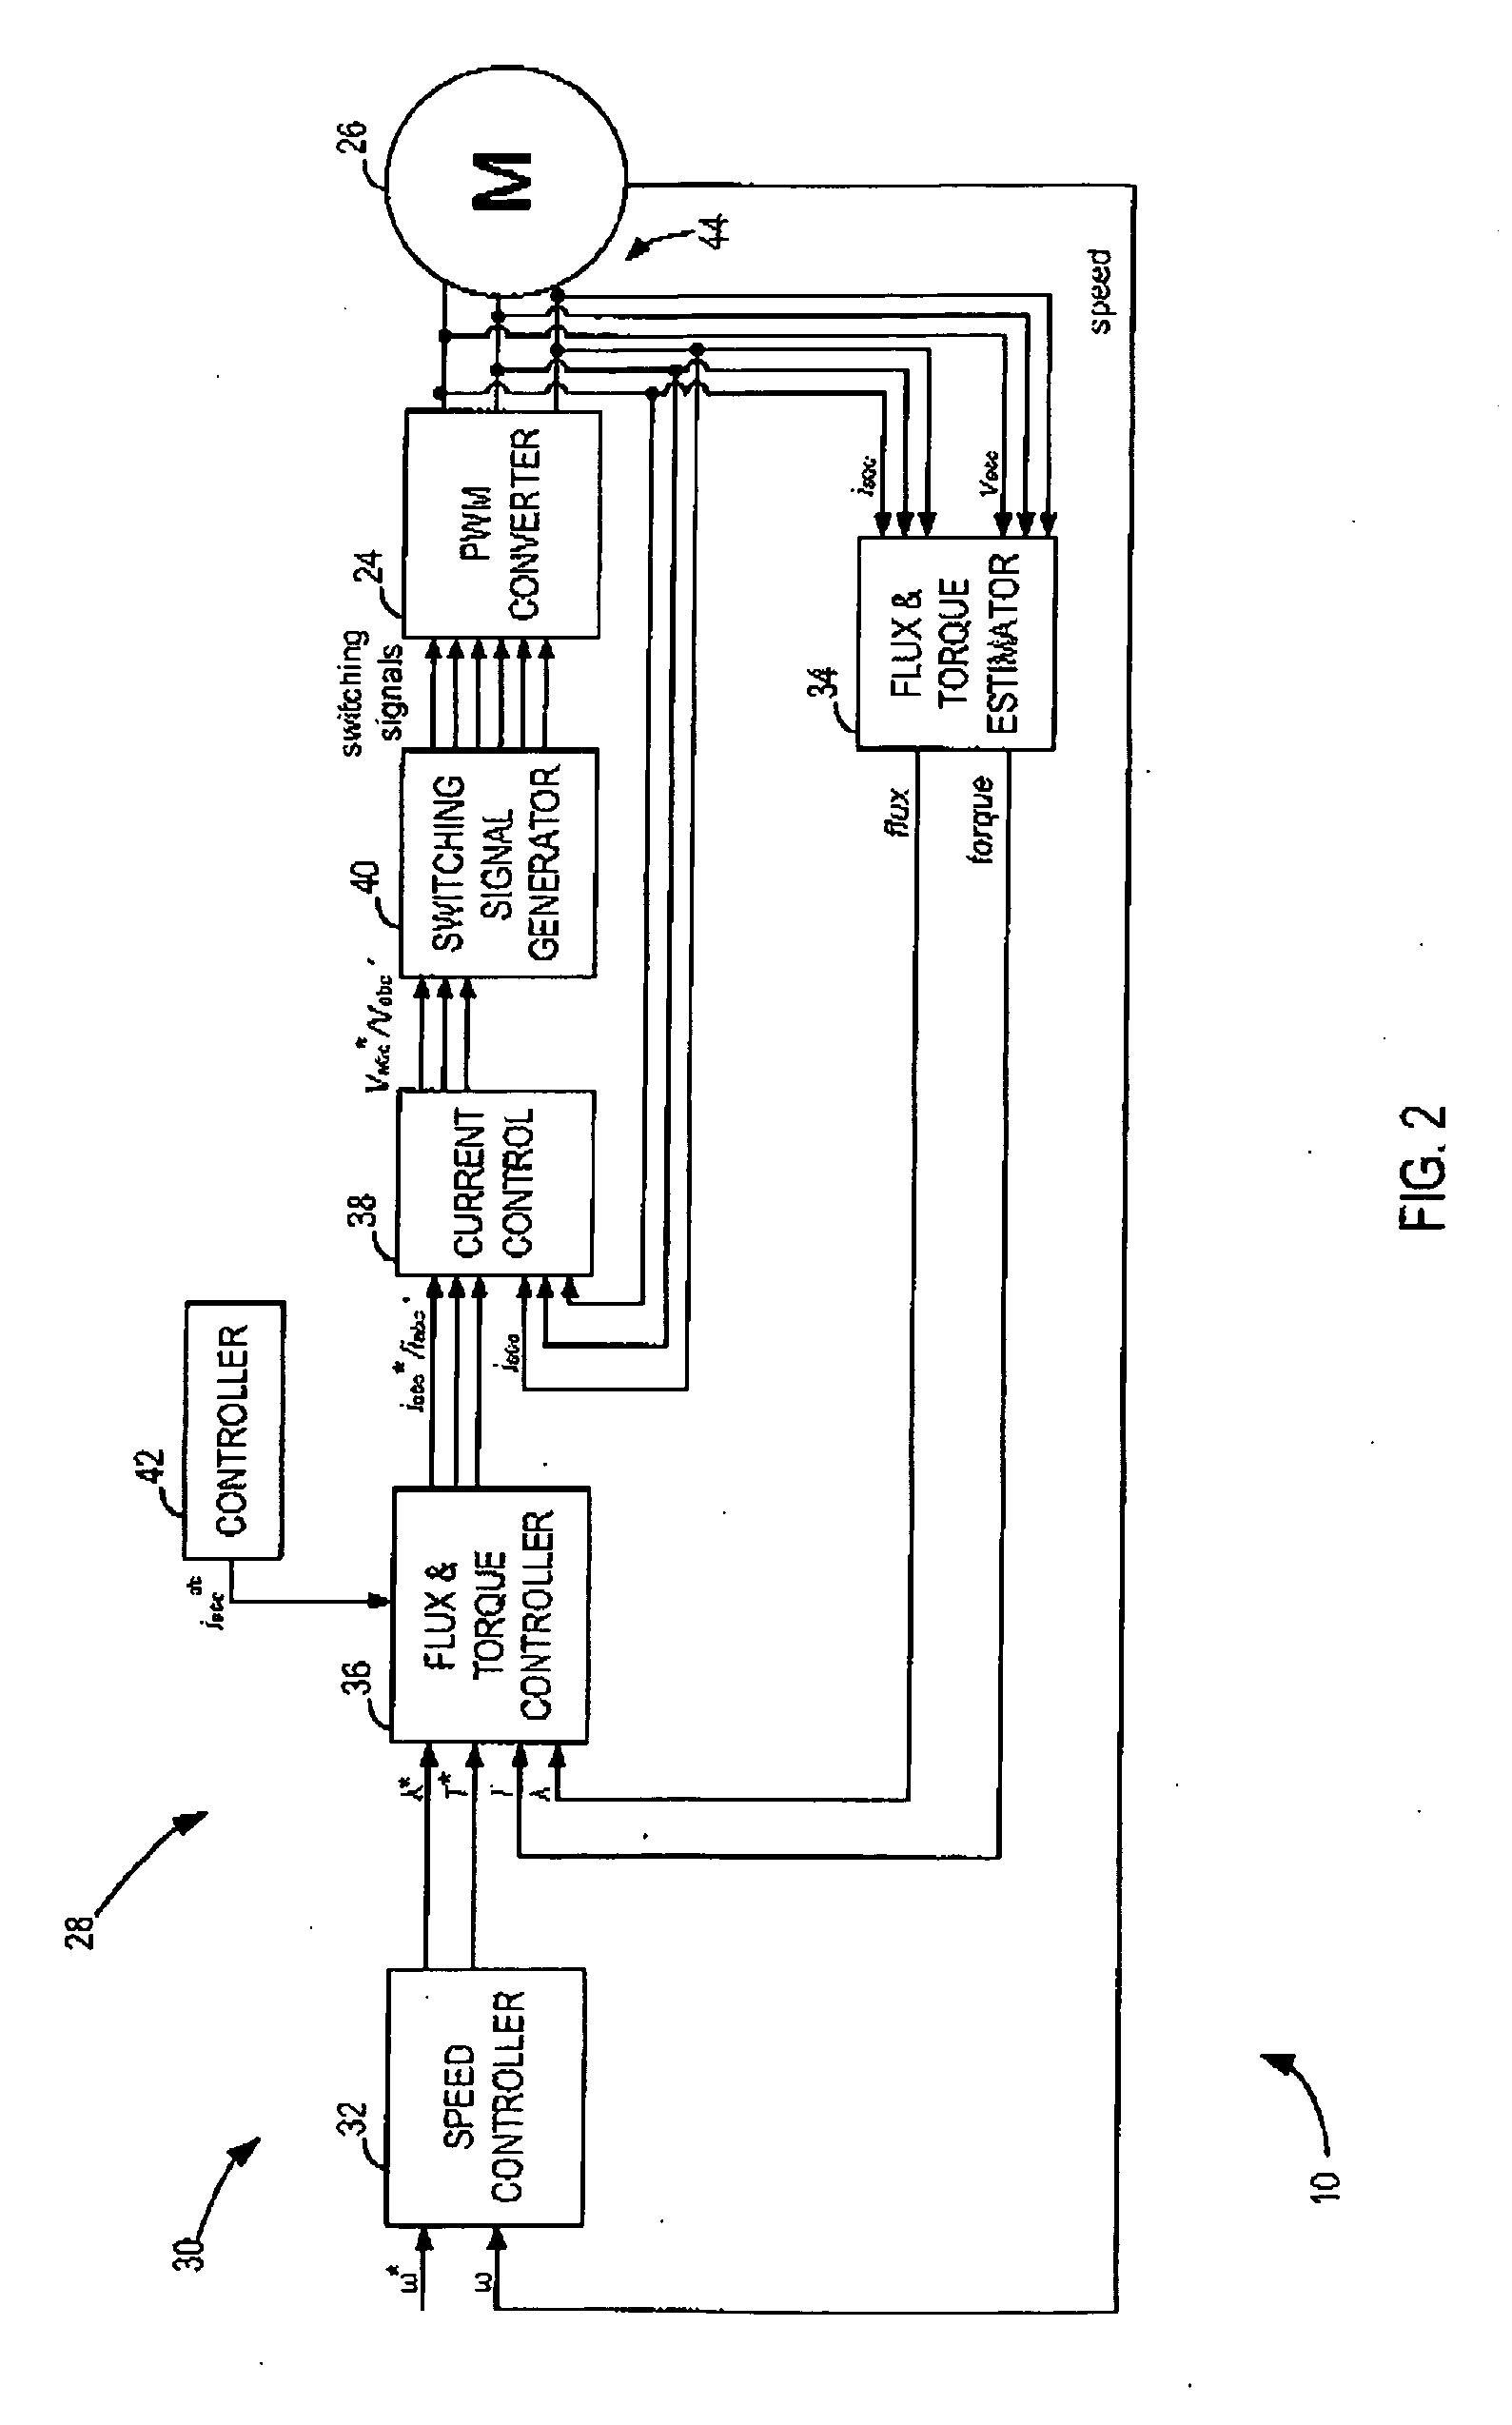 System and method for determining stator winding resistance in an ac motor using motor drives